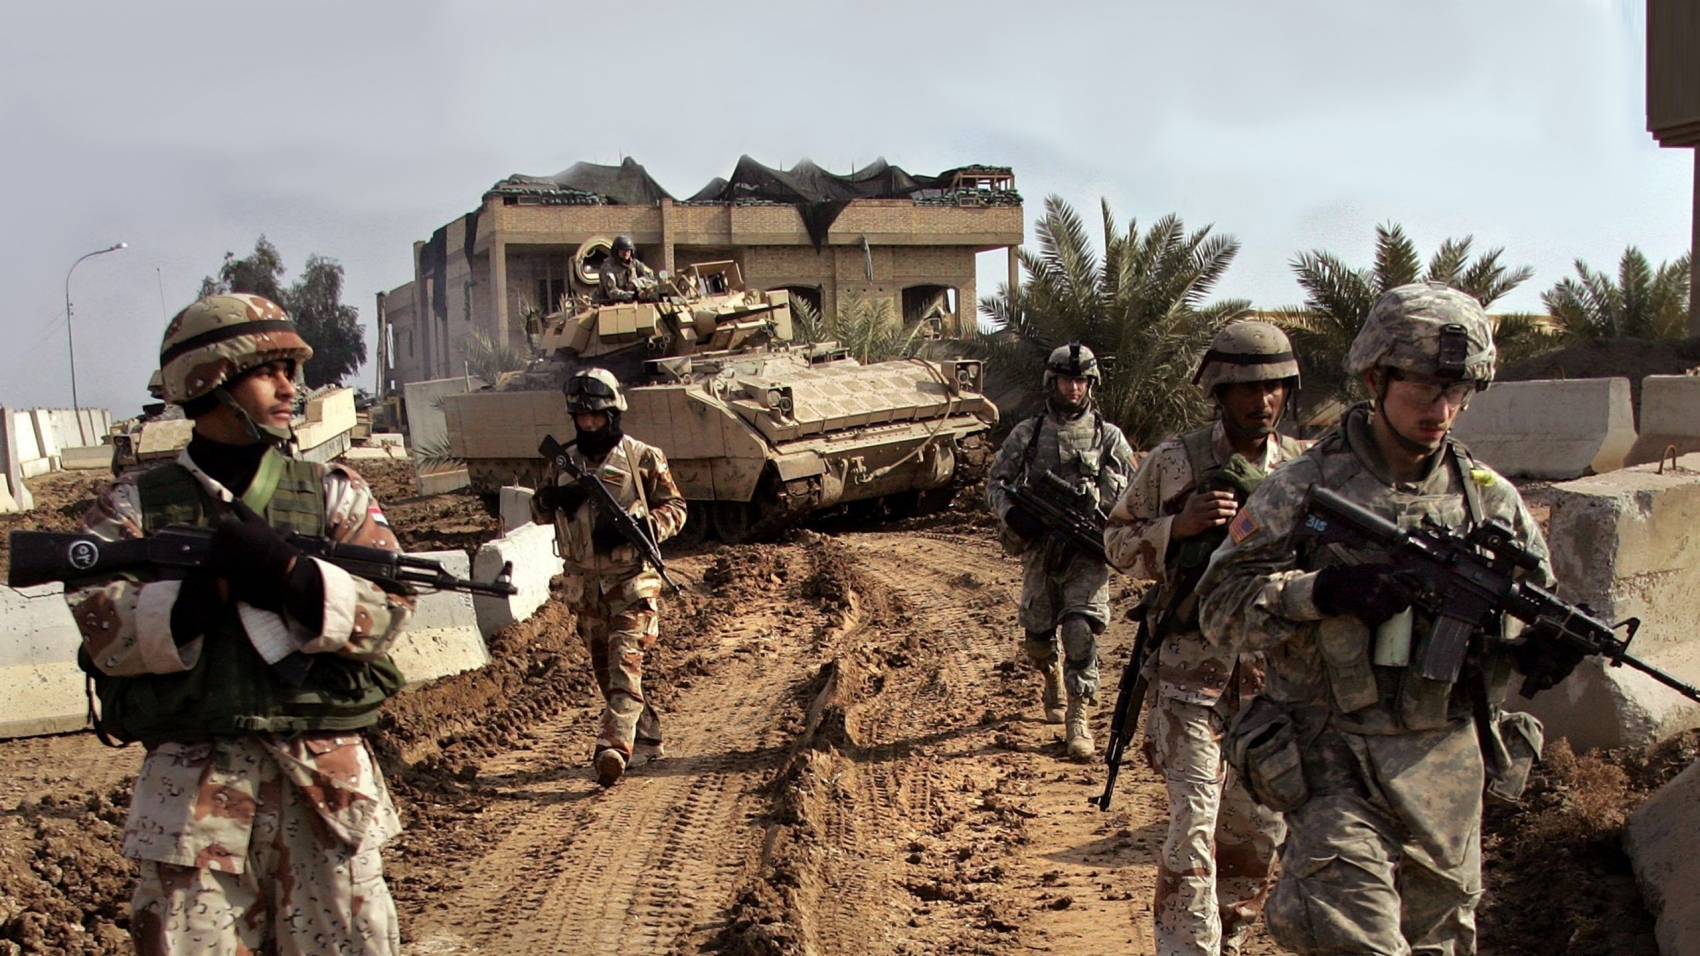 RAMADI, IRAQ - JANUARY 16:  Iraqi Army troops patrol with U.S. soldiers from B Company, 1st Battalion, 26th Infantry Regiment through Ramadi January 16, 2007 in Iraq's Anbar province. Ramadi, with daily fighting between American forces and insurgents, has one of the highest casualty rates in Iraq.  (Photo by John Moore/Getty Images)